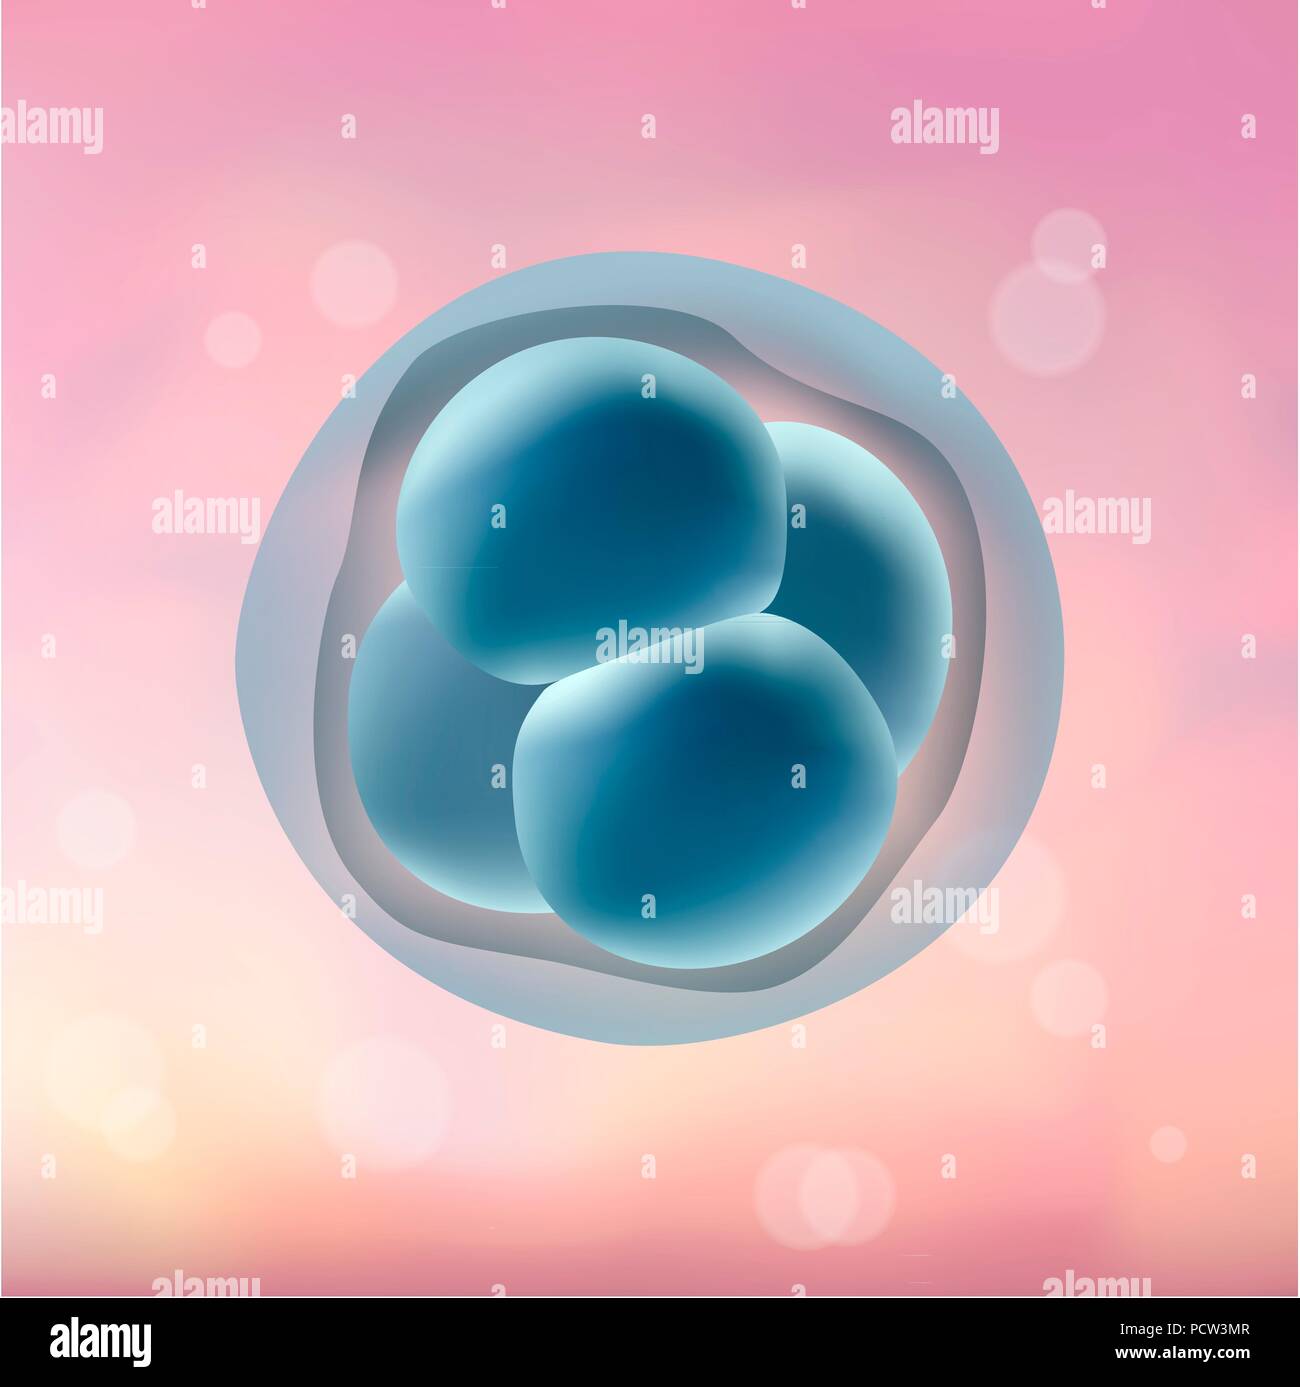 4-cell stage embryo, illustration. Stock Photo